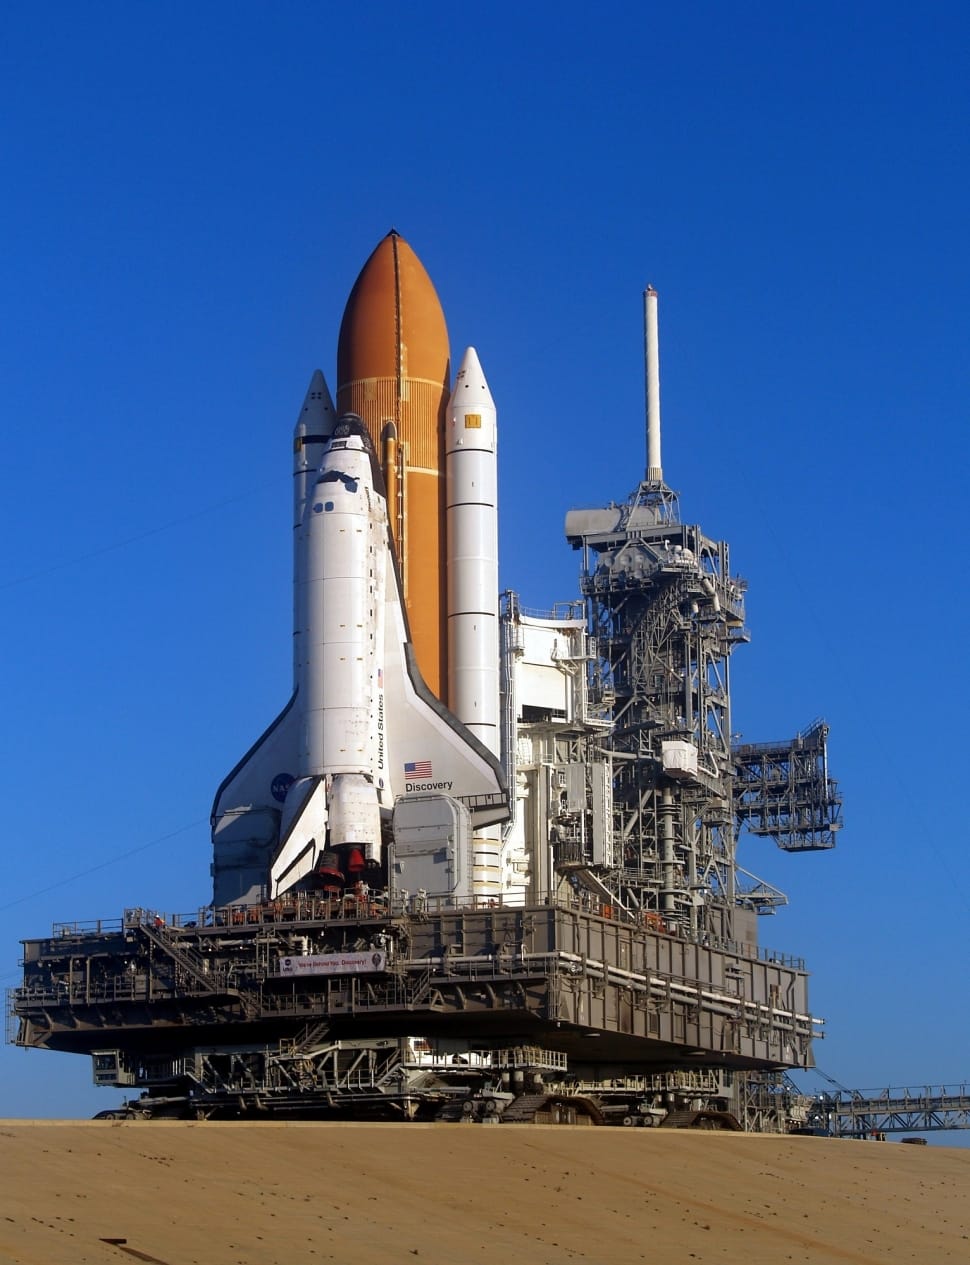 Rollout, Discovery Space Shuttle, blue, industry preview